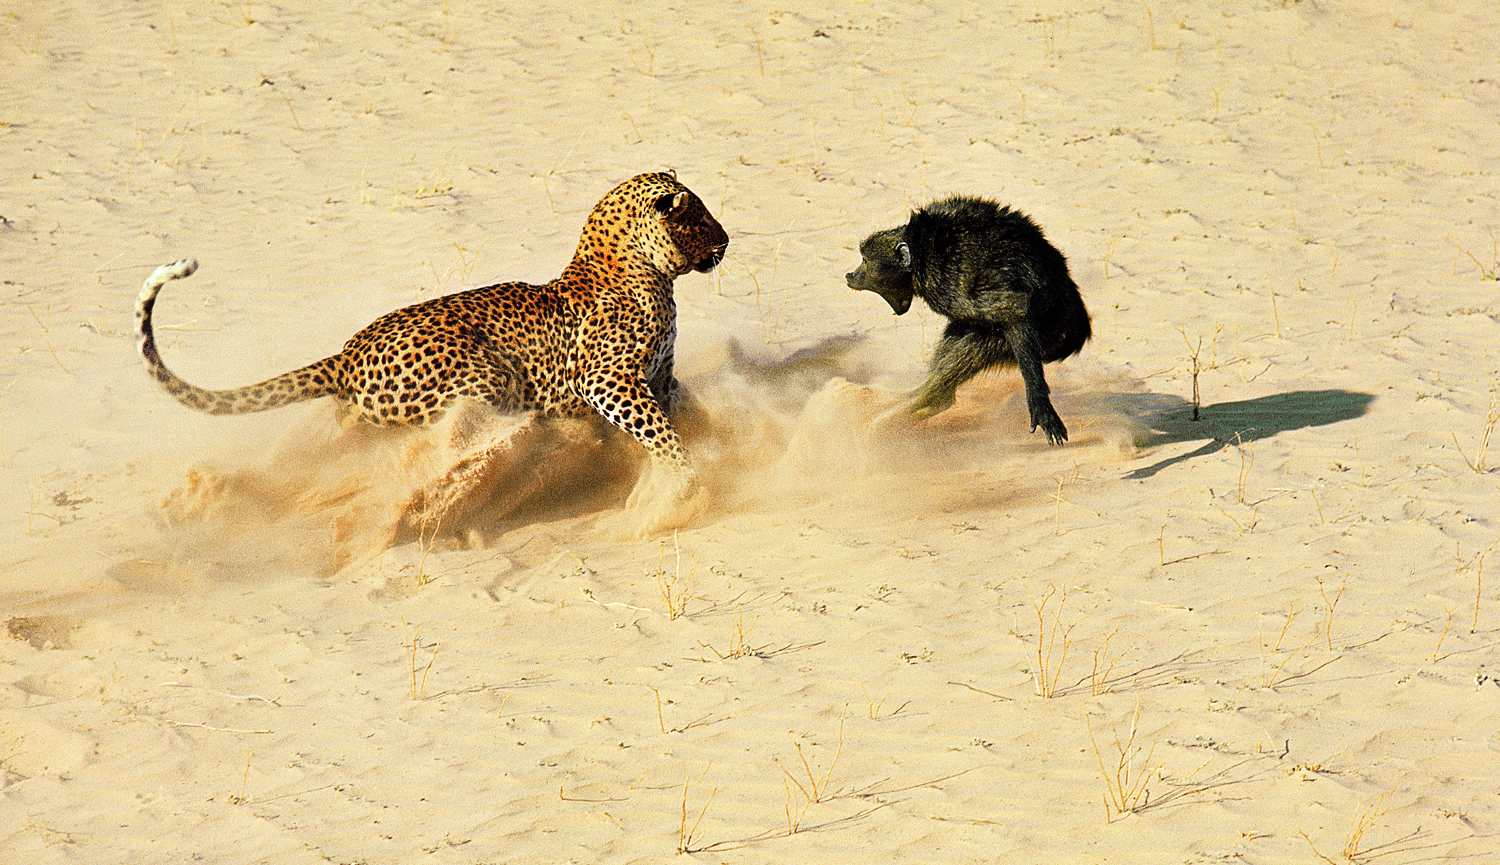 A leopard about to kill a baboon, Botswana, Africa, 1966.